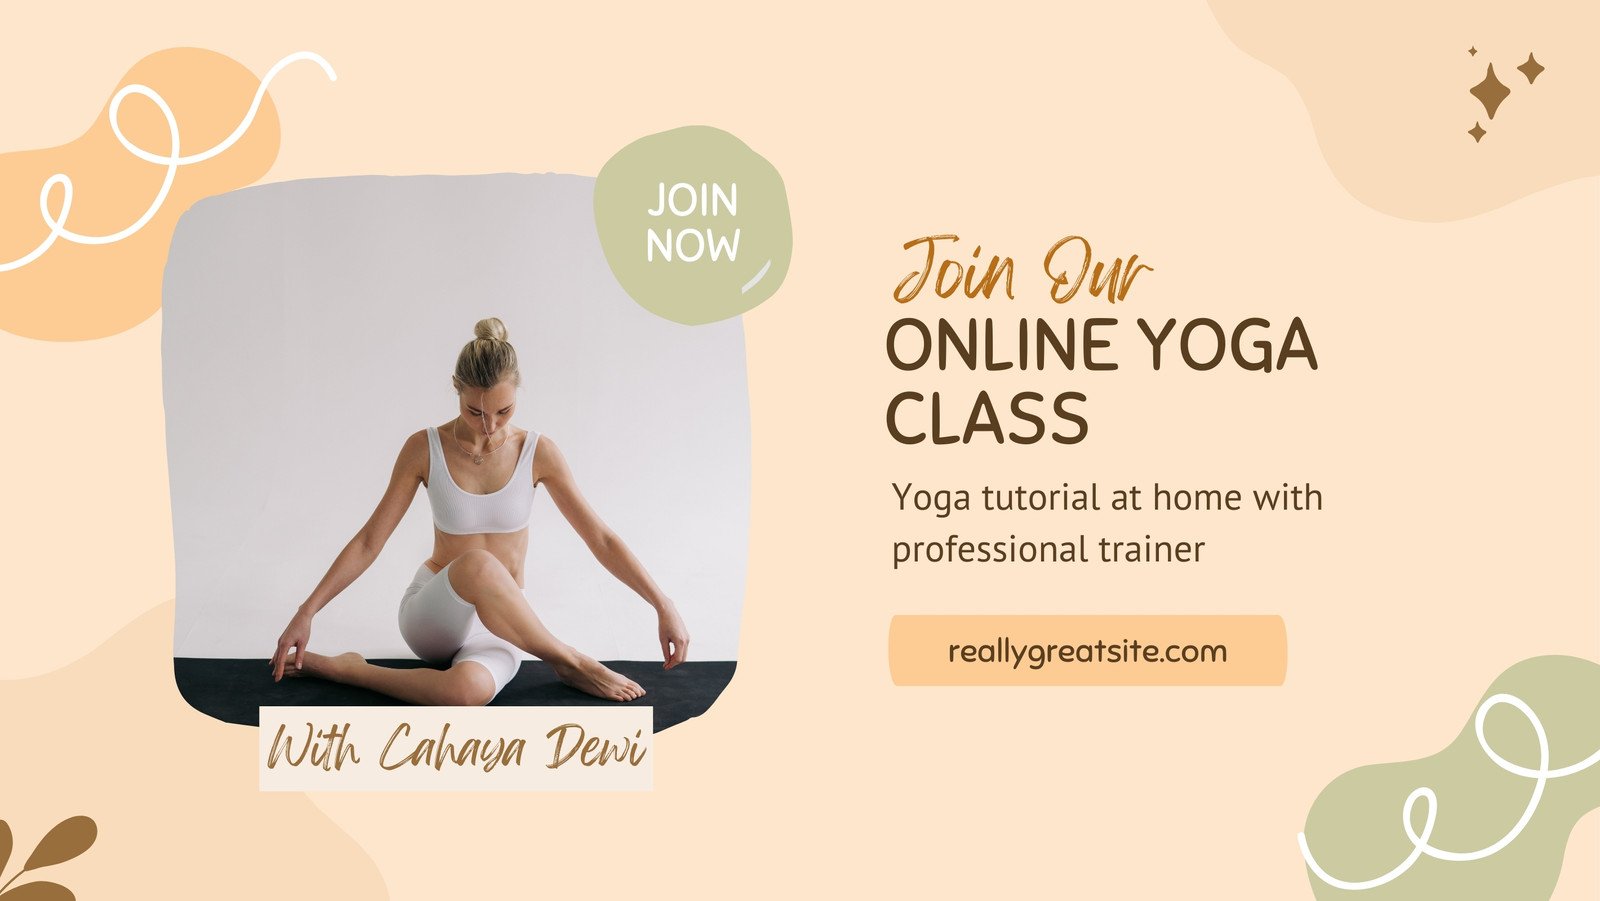 Online Classes - YOGA WITH PAULINA